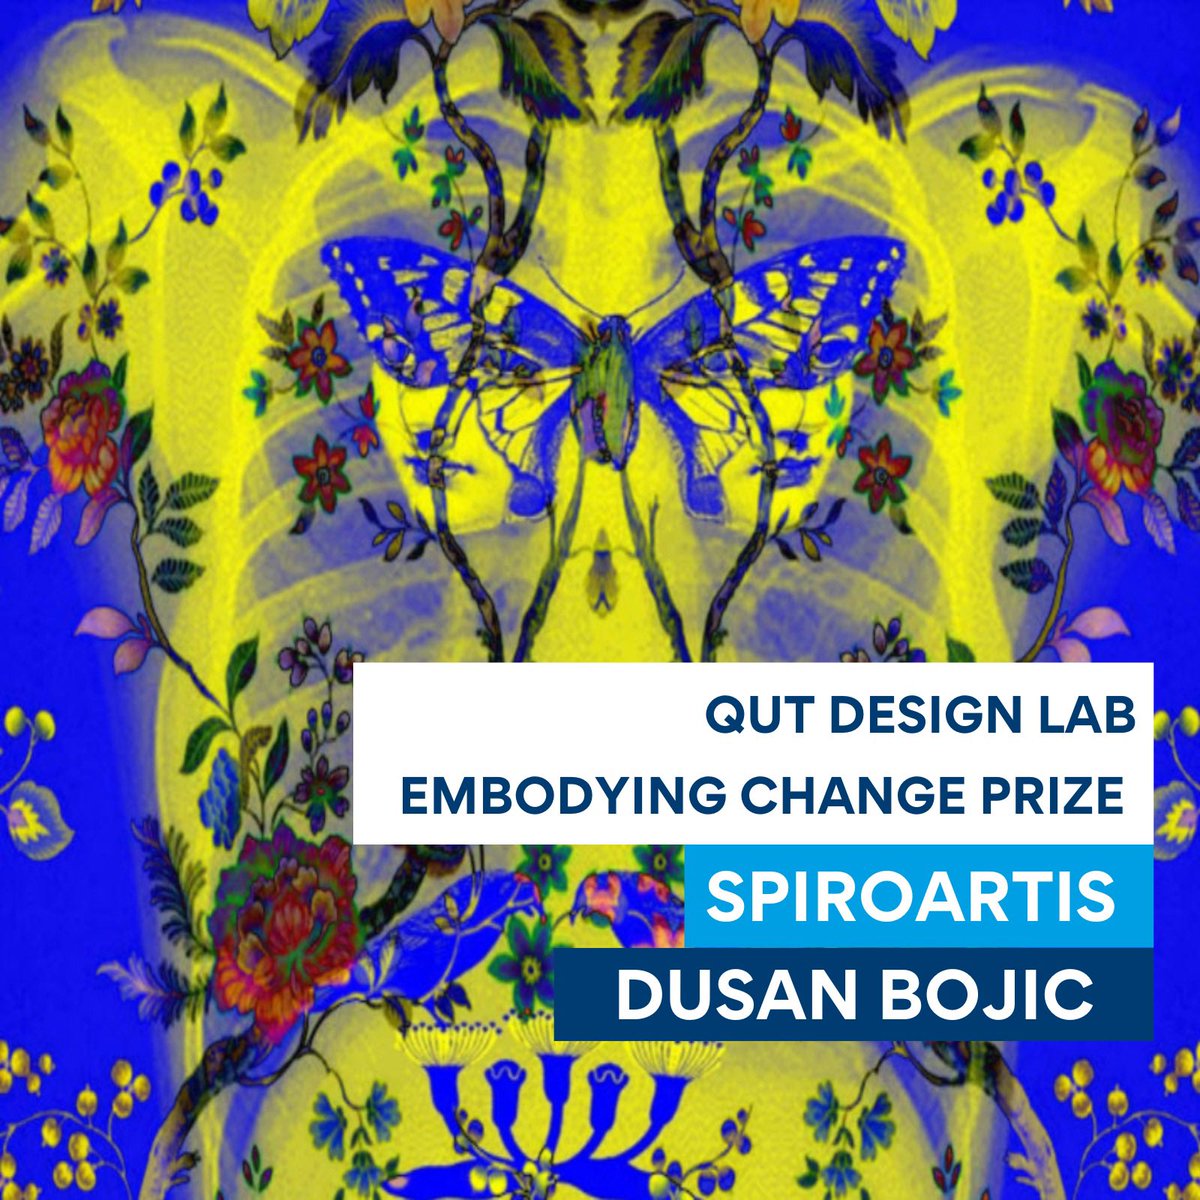 .@QUTdesign PhD student Dusan Bojic wins the QUT Design lab-embodying change prize with his SpiroArtis artwork #QUTResearchInFocus #QUTResearch